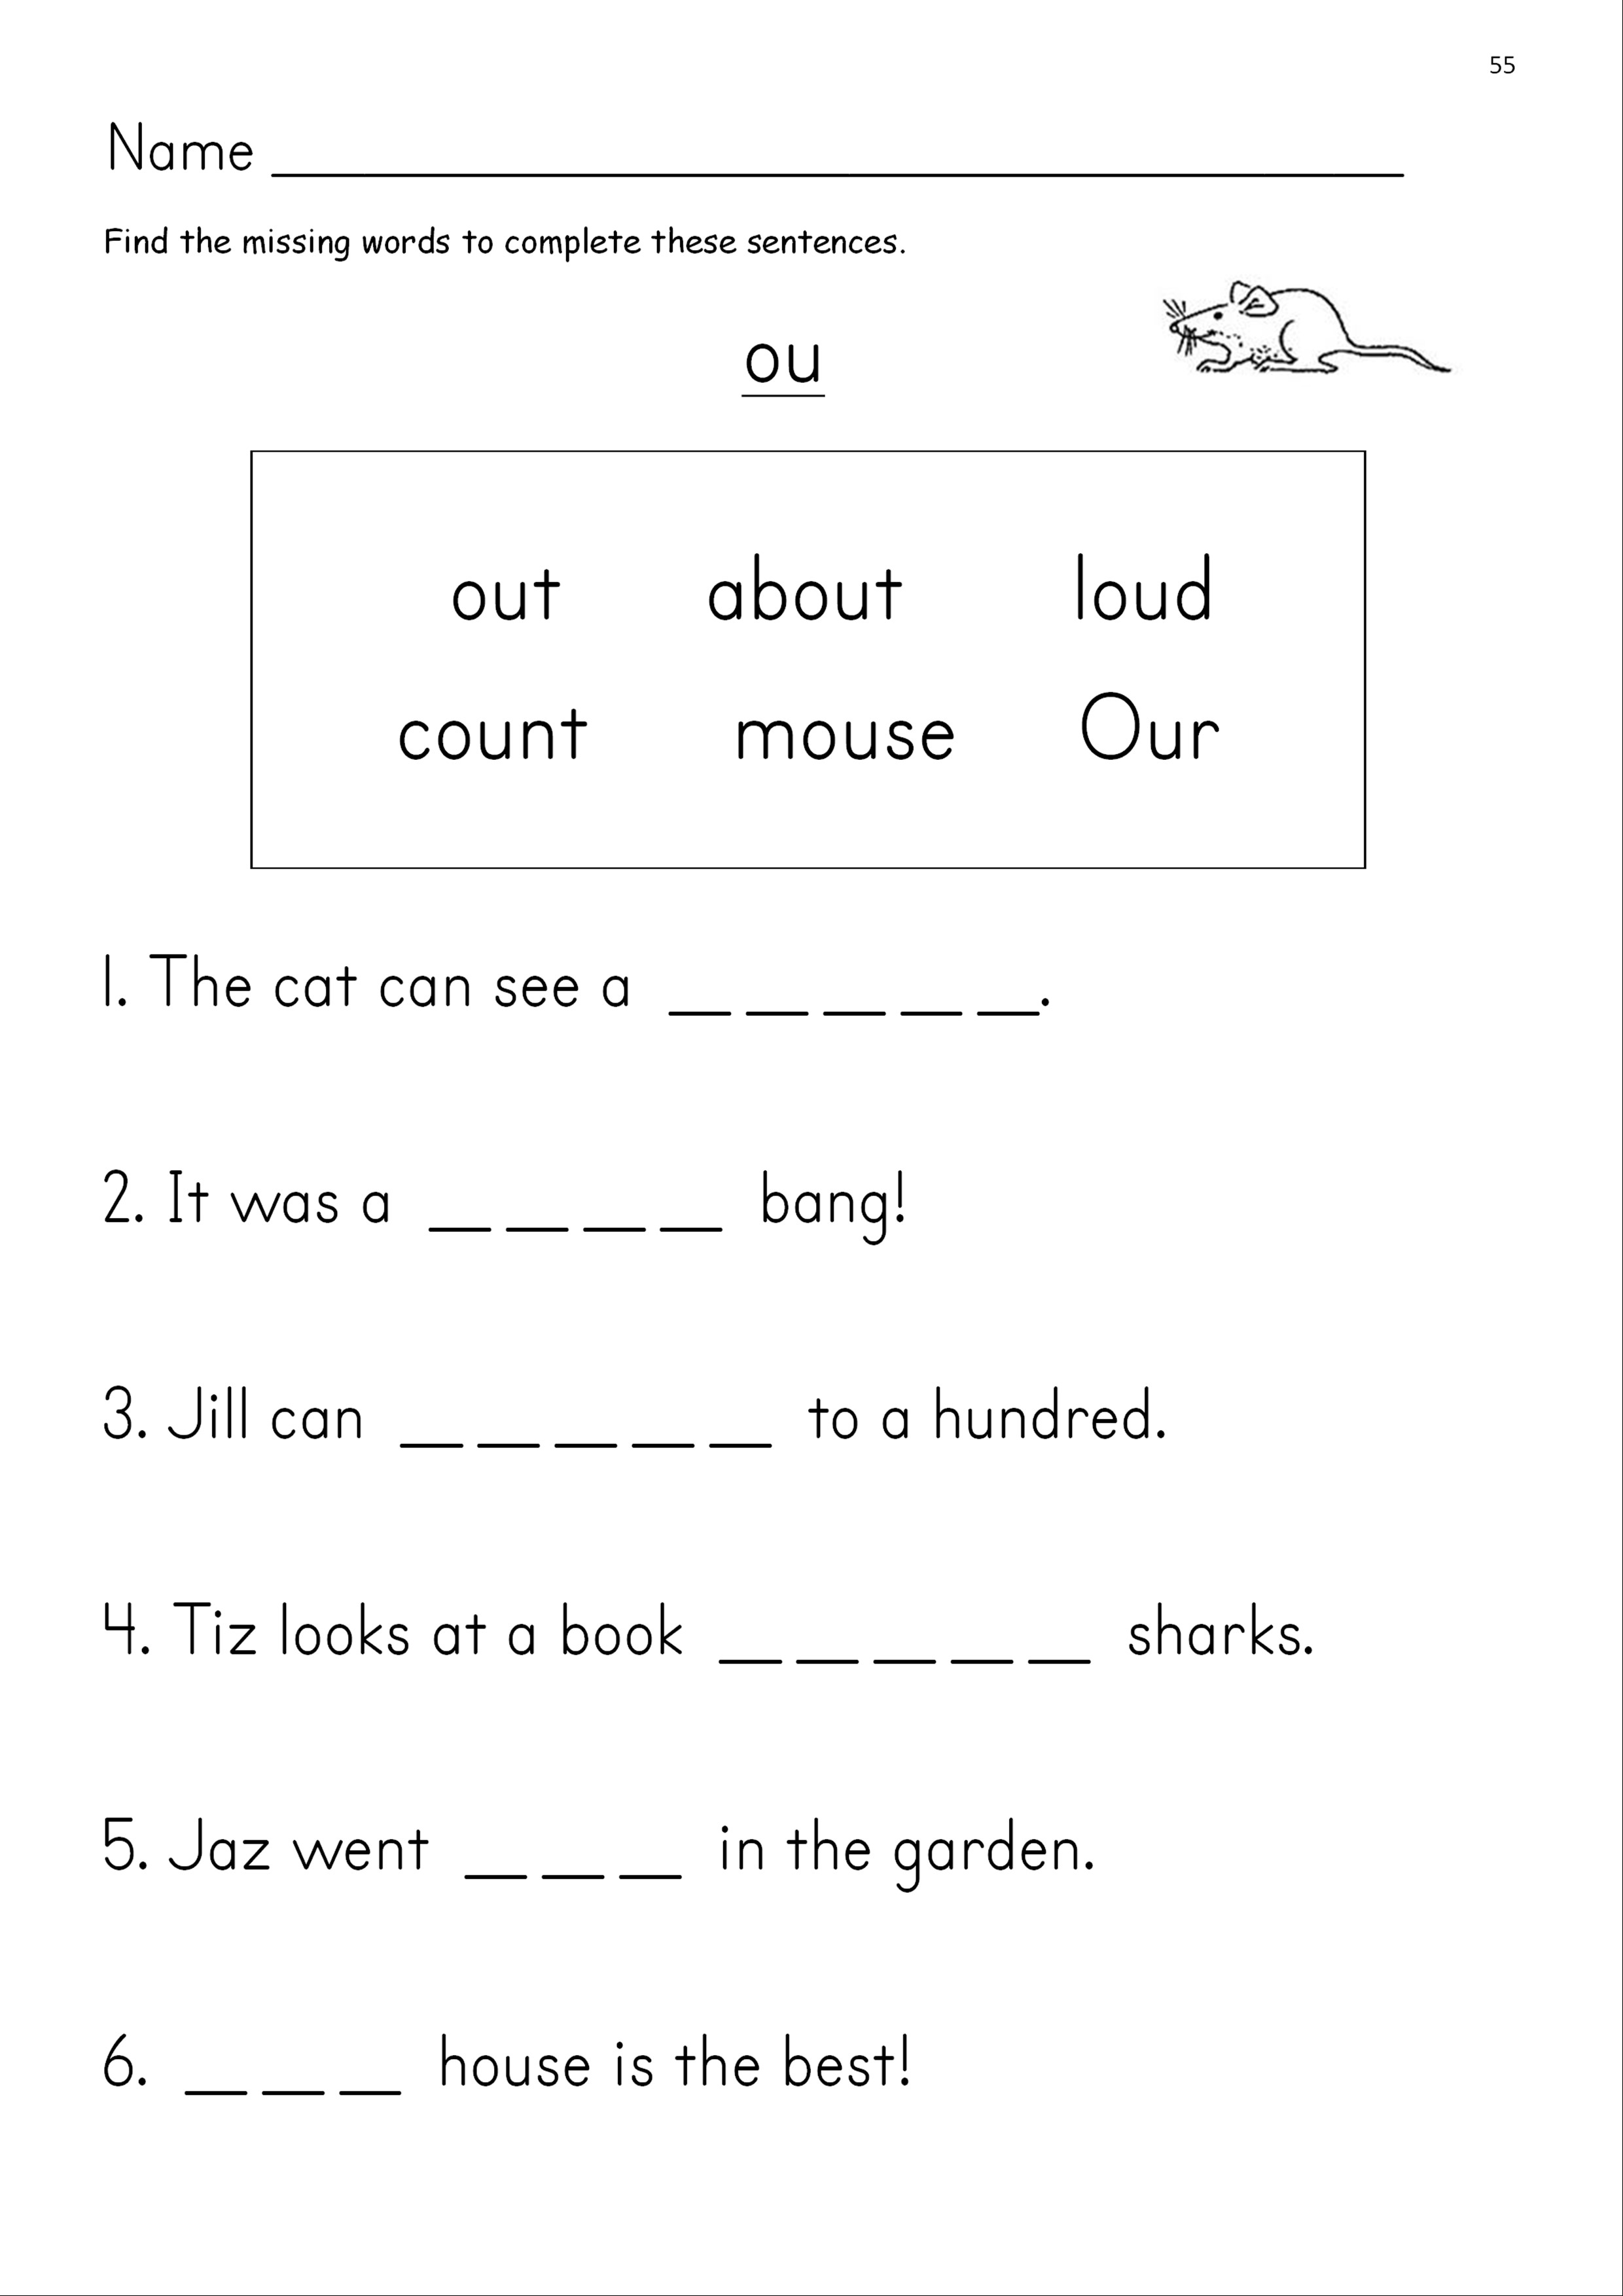 ou-word-list-free-printable-ou-sound-words-for-phonics-lessons-502